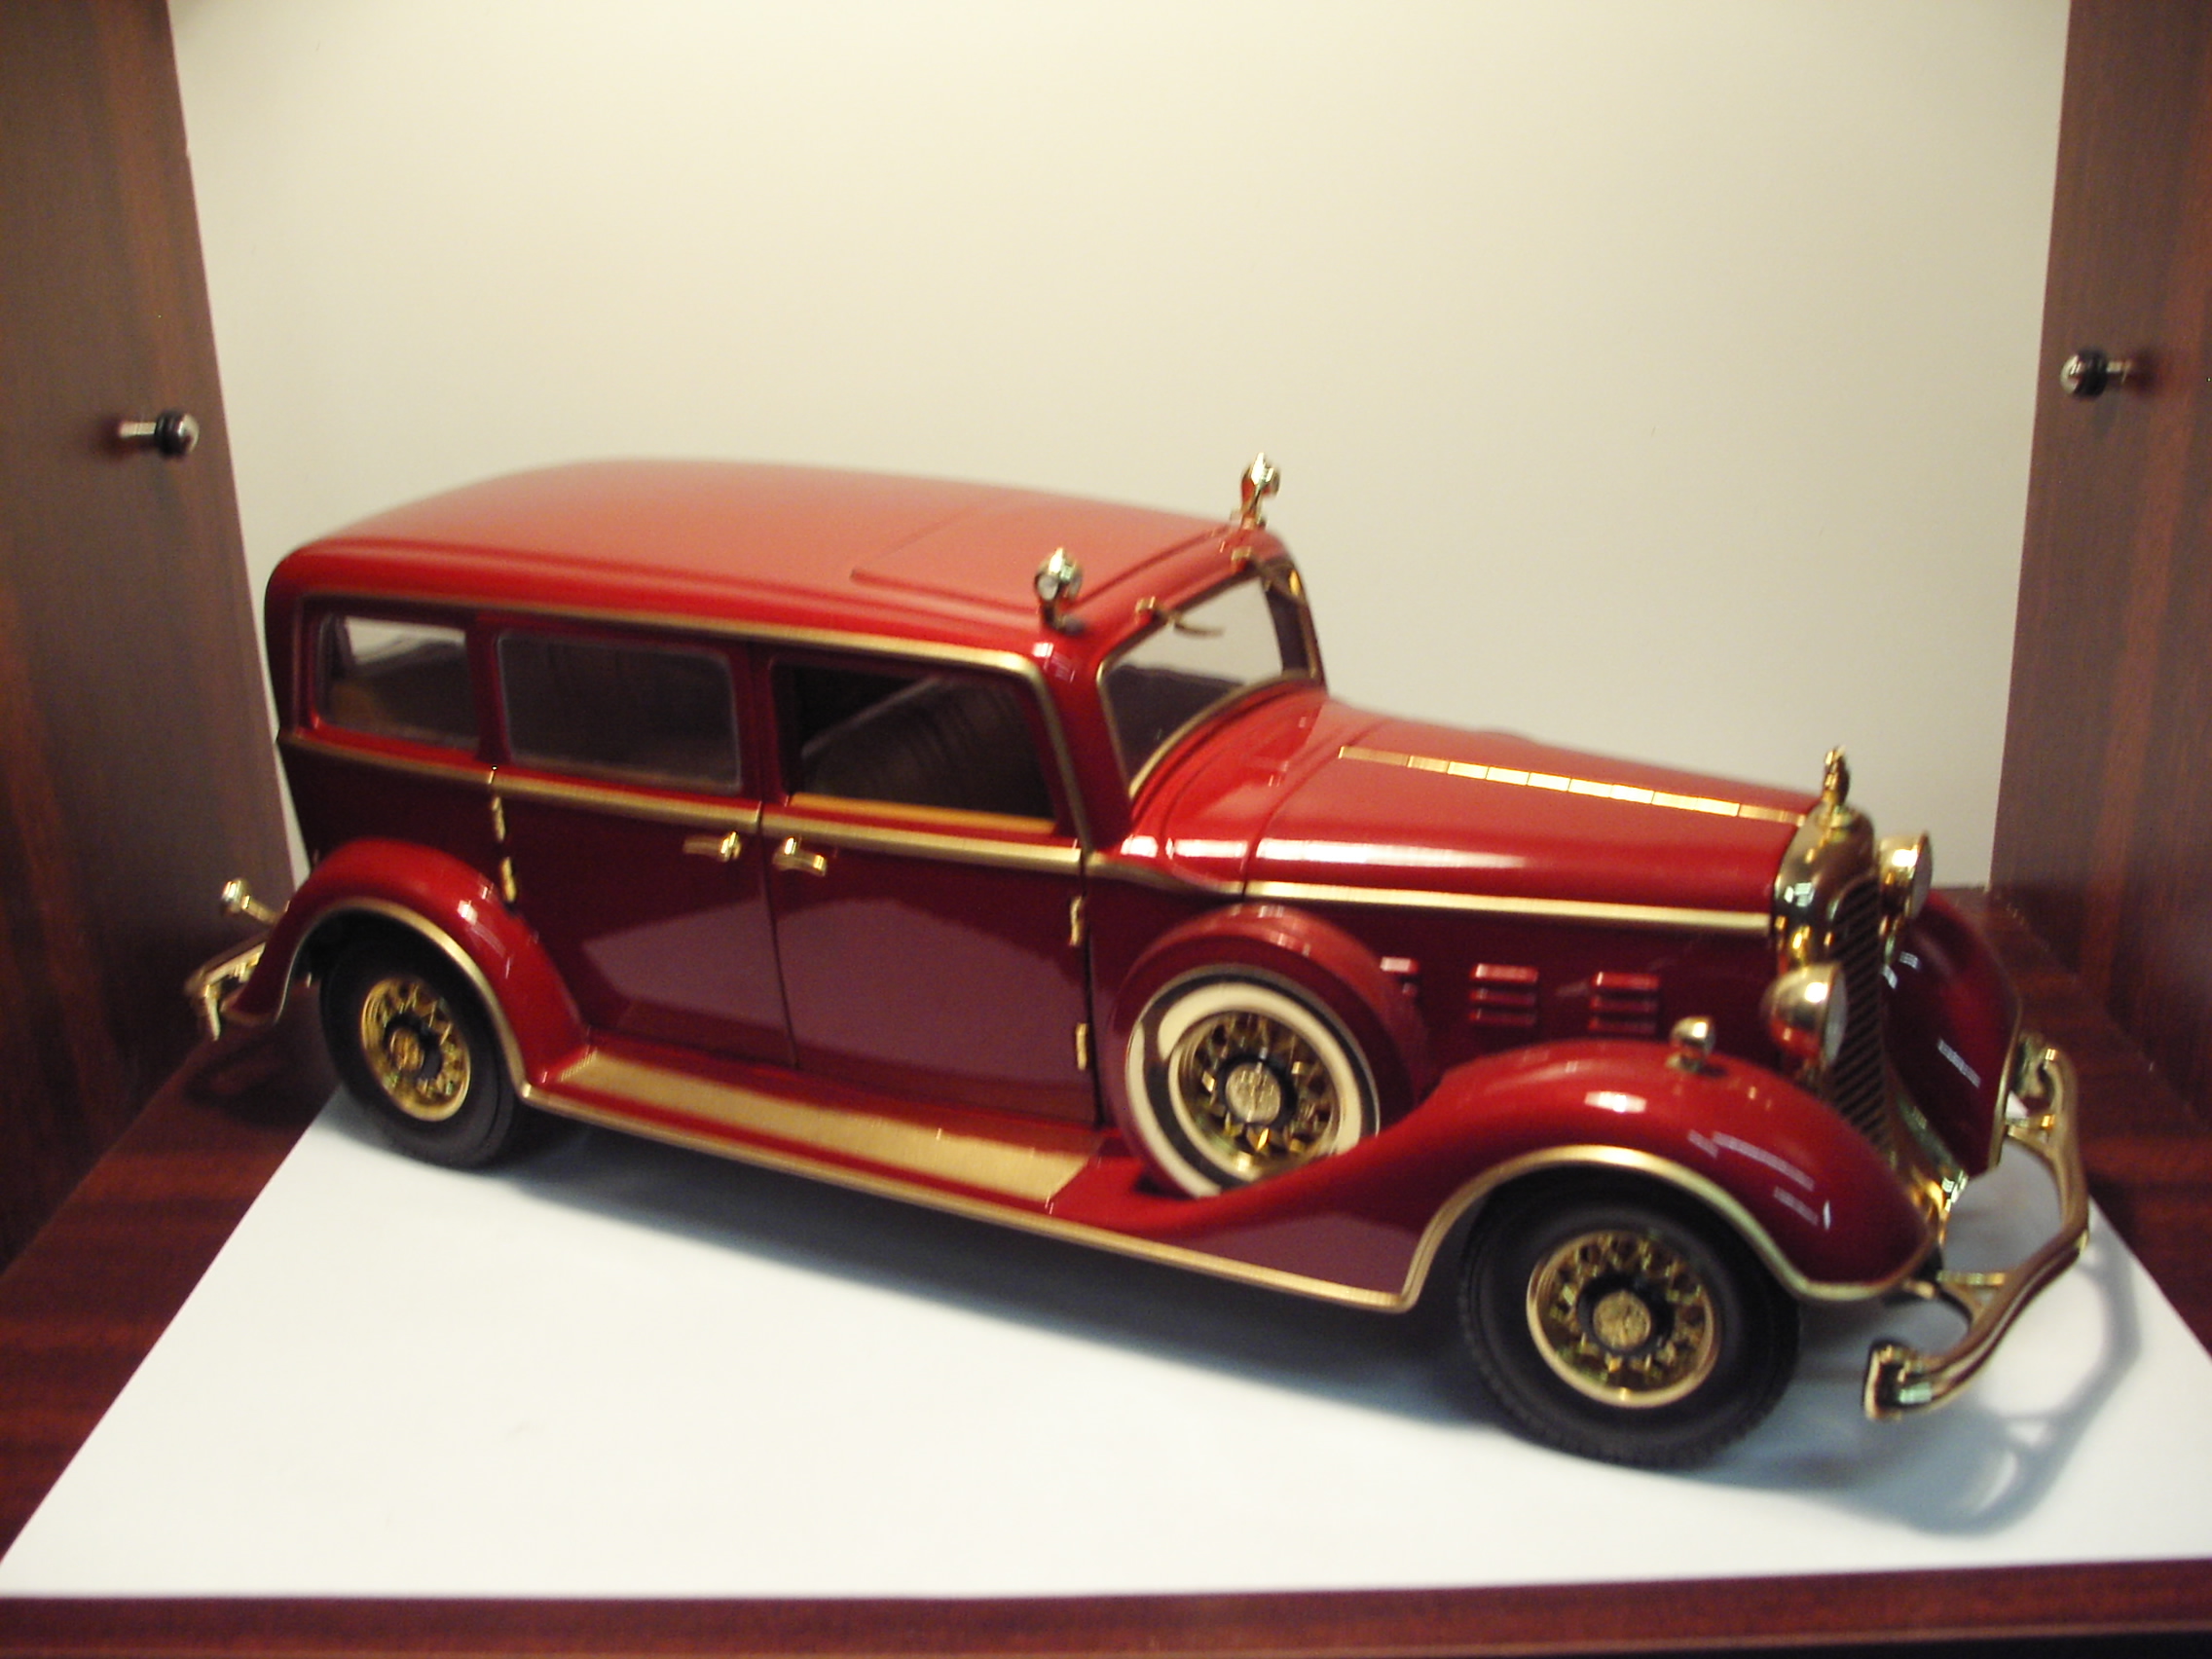 CADILLAC DELUXE TUDOR 1932 - the State Limousine of Puyi